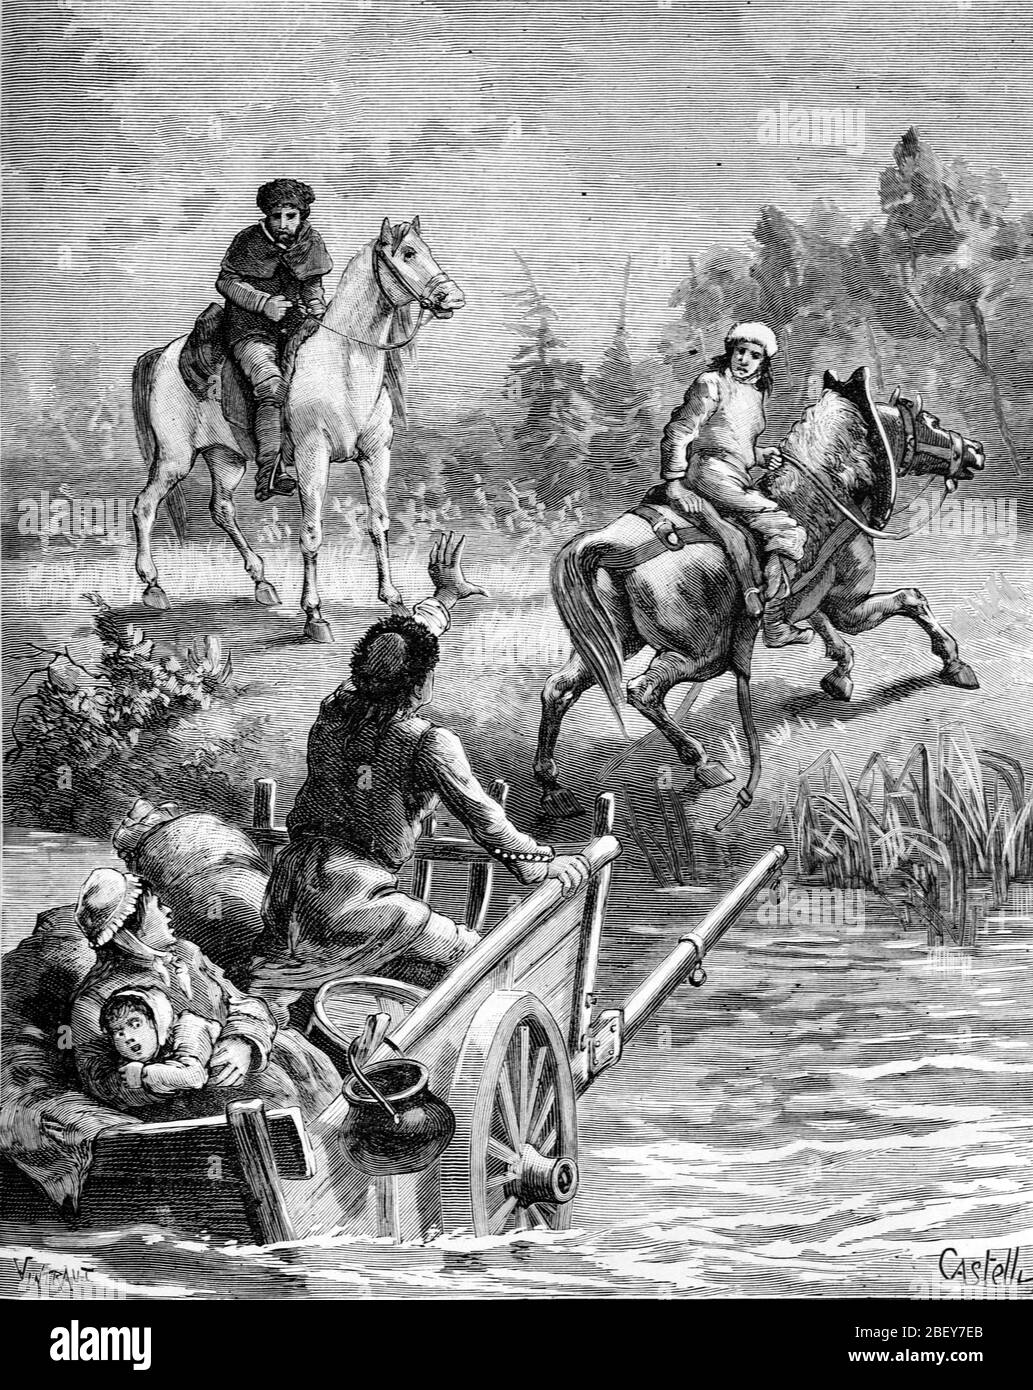 Weiße Siedler in Waggons oder Waggons Trains Crossing River on Migration West towards the Wild West American Frontier USA United Stats of America. Vintage oder Alte Illustration oder Gravur 1888 Stockfoto